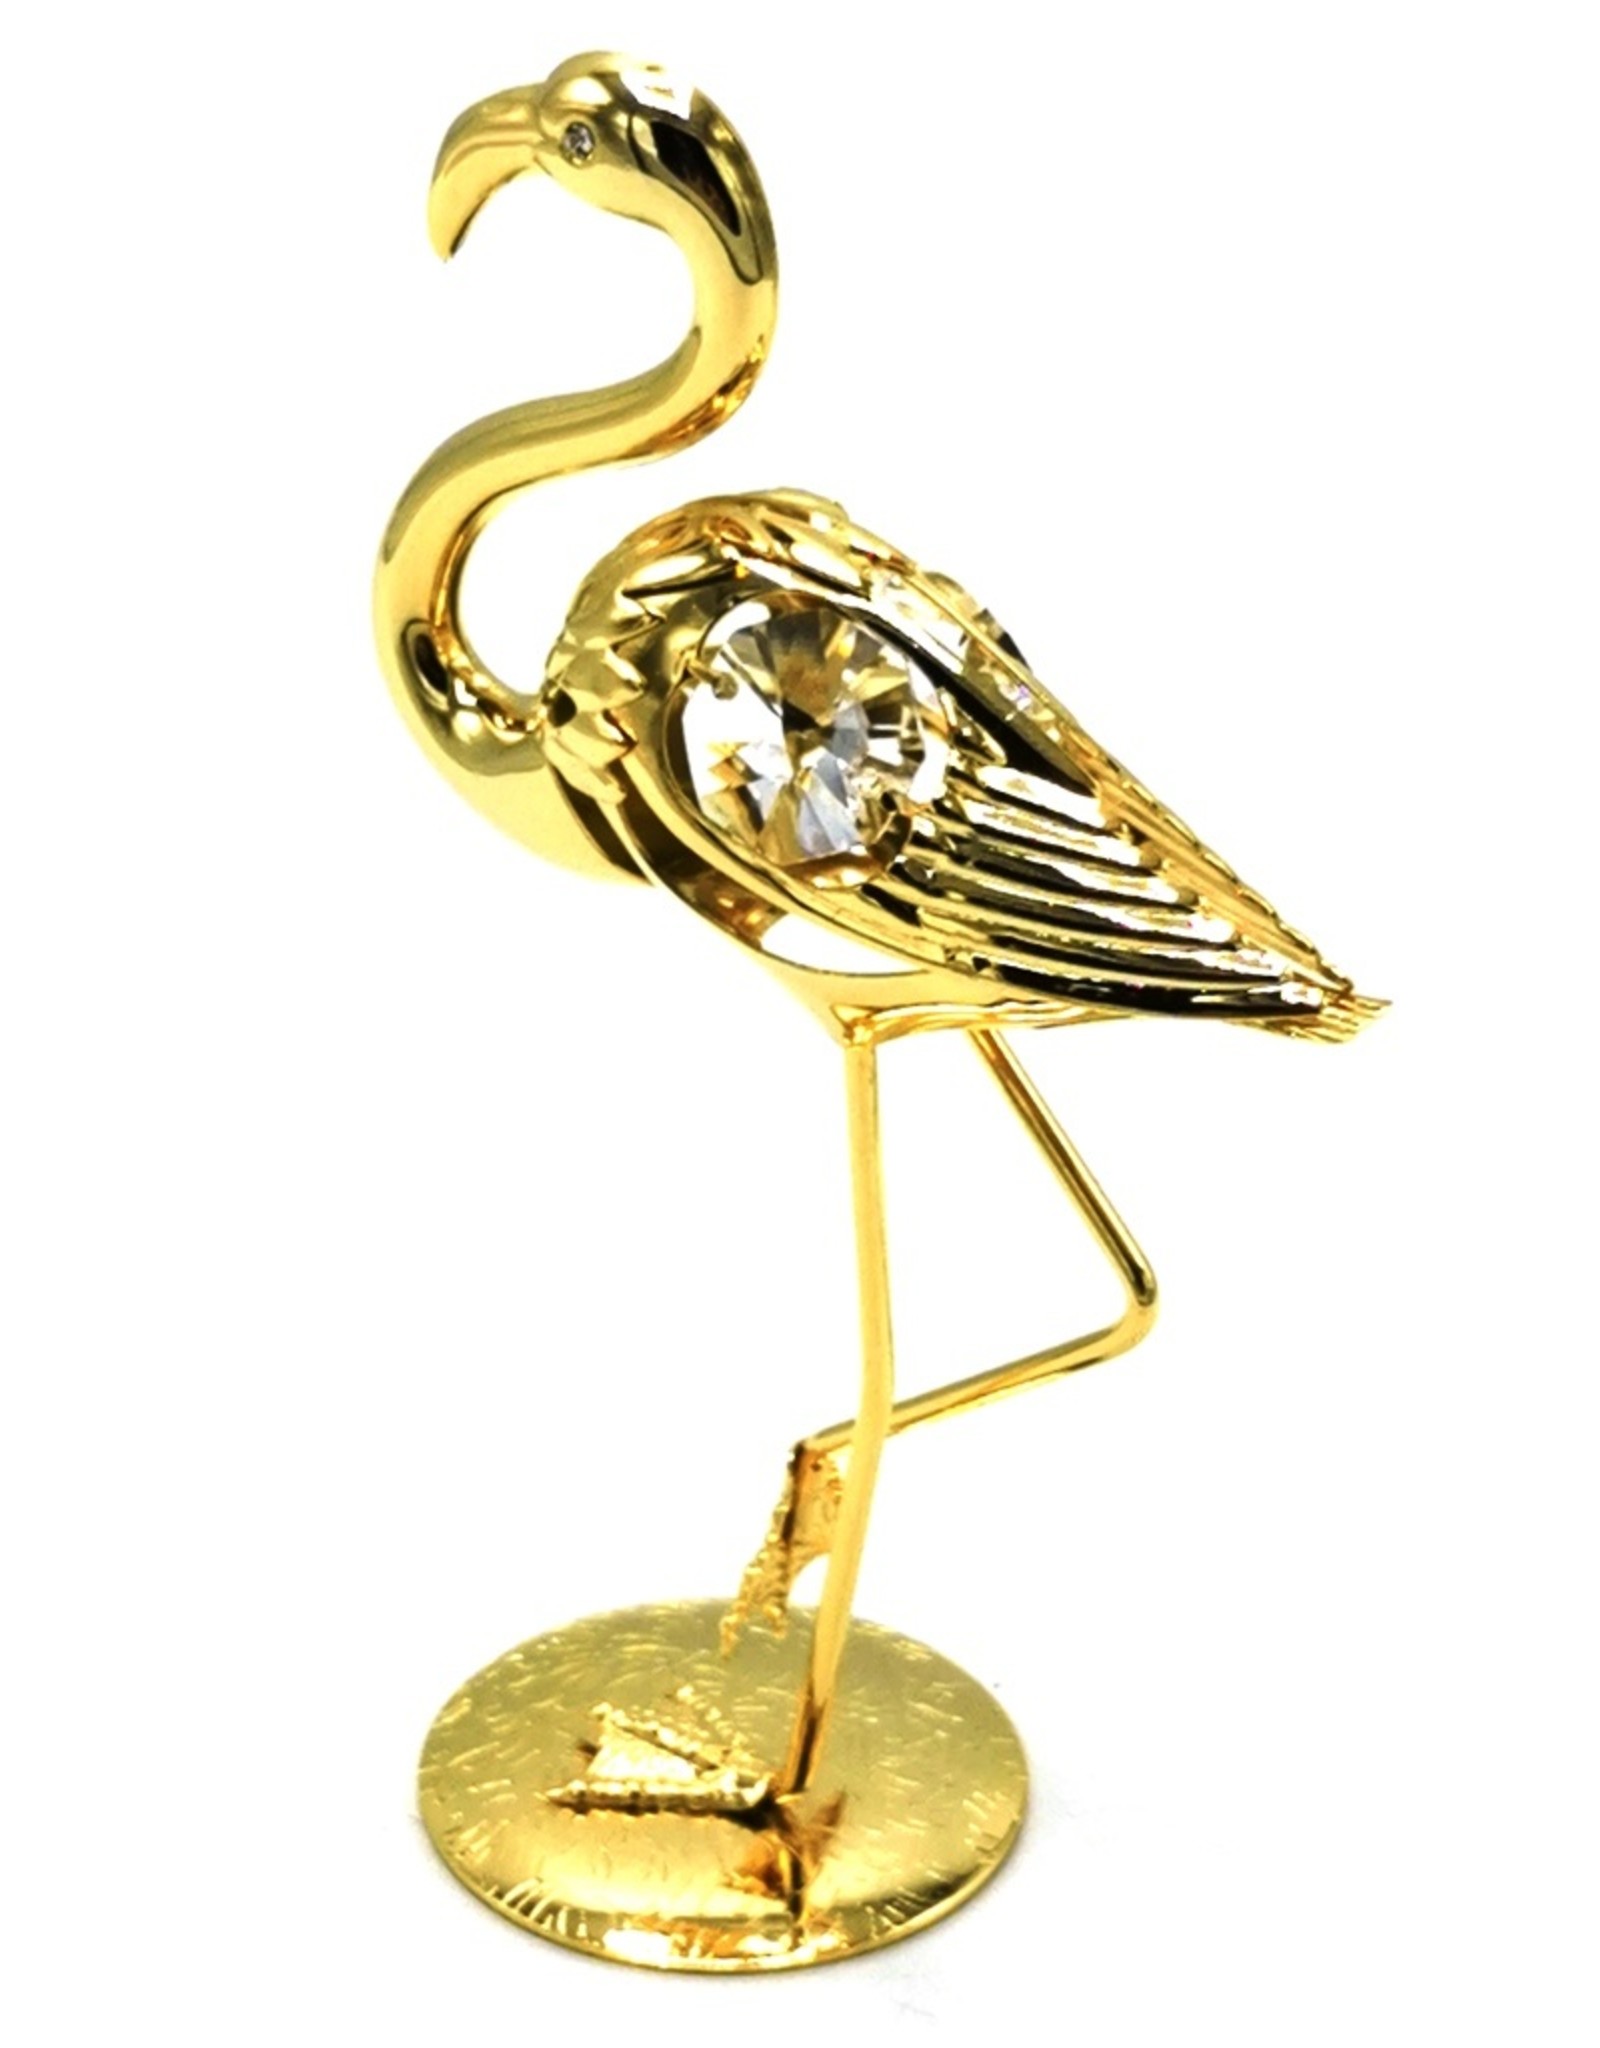 Crystal Temptations Miscellaneous - Miniature Flamingo Gold-plated and with Swarovski